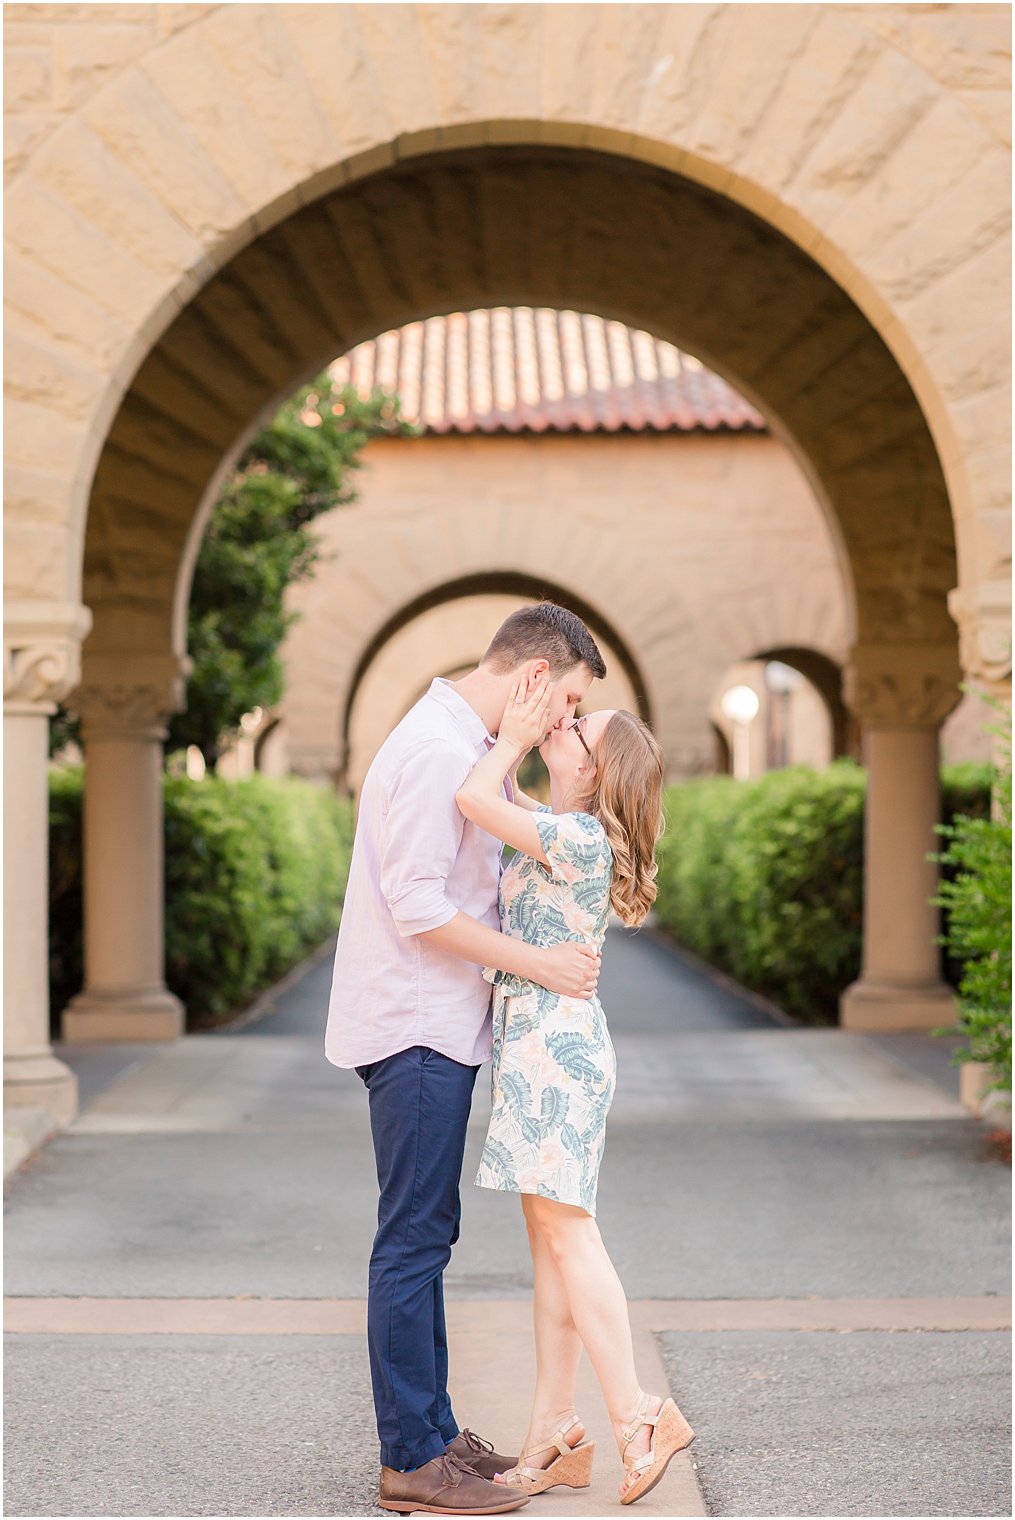 Couple kissing under an arch at Stanford University